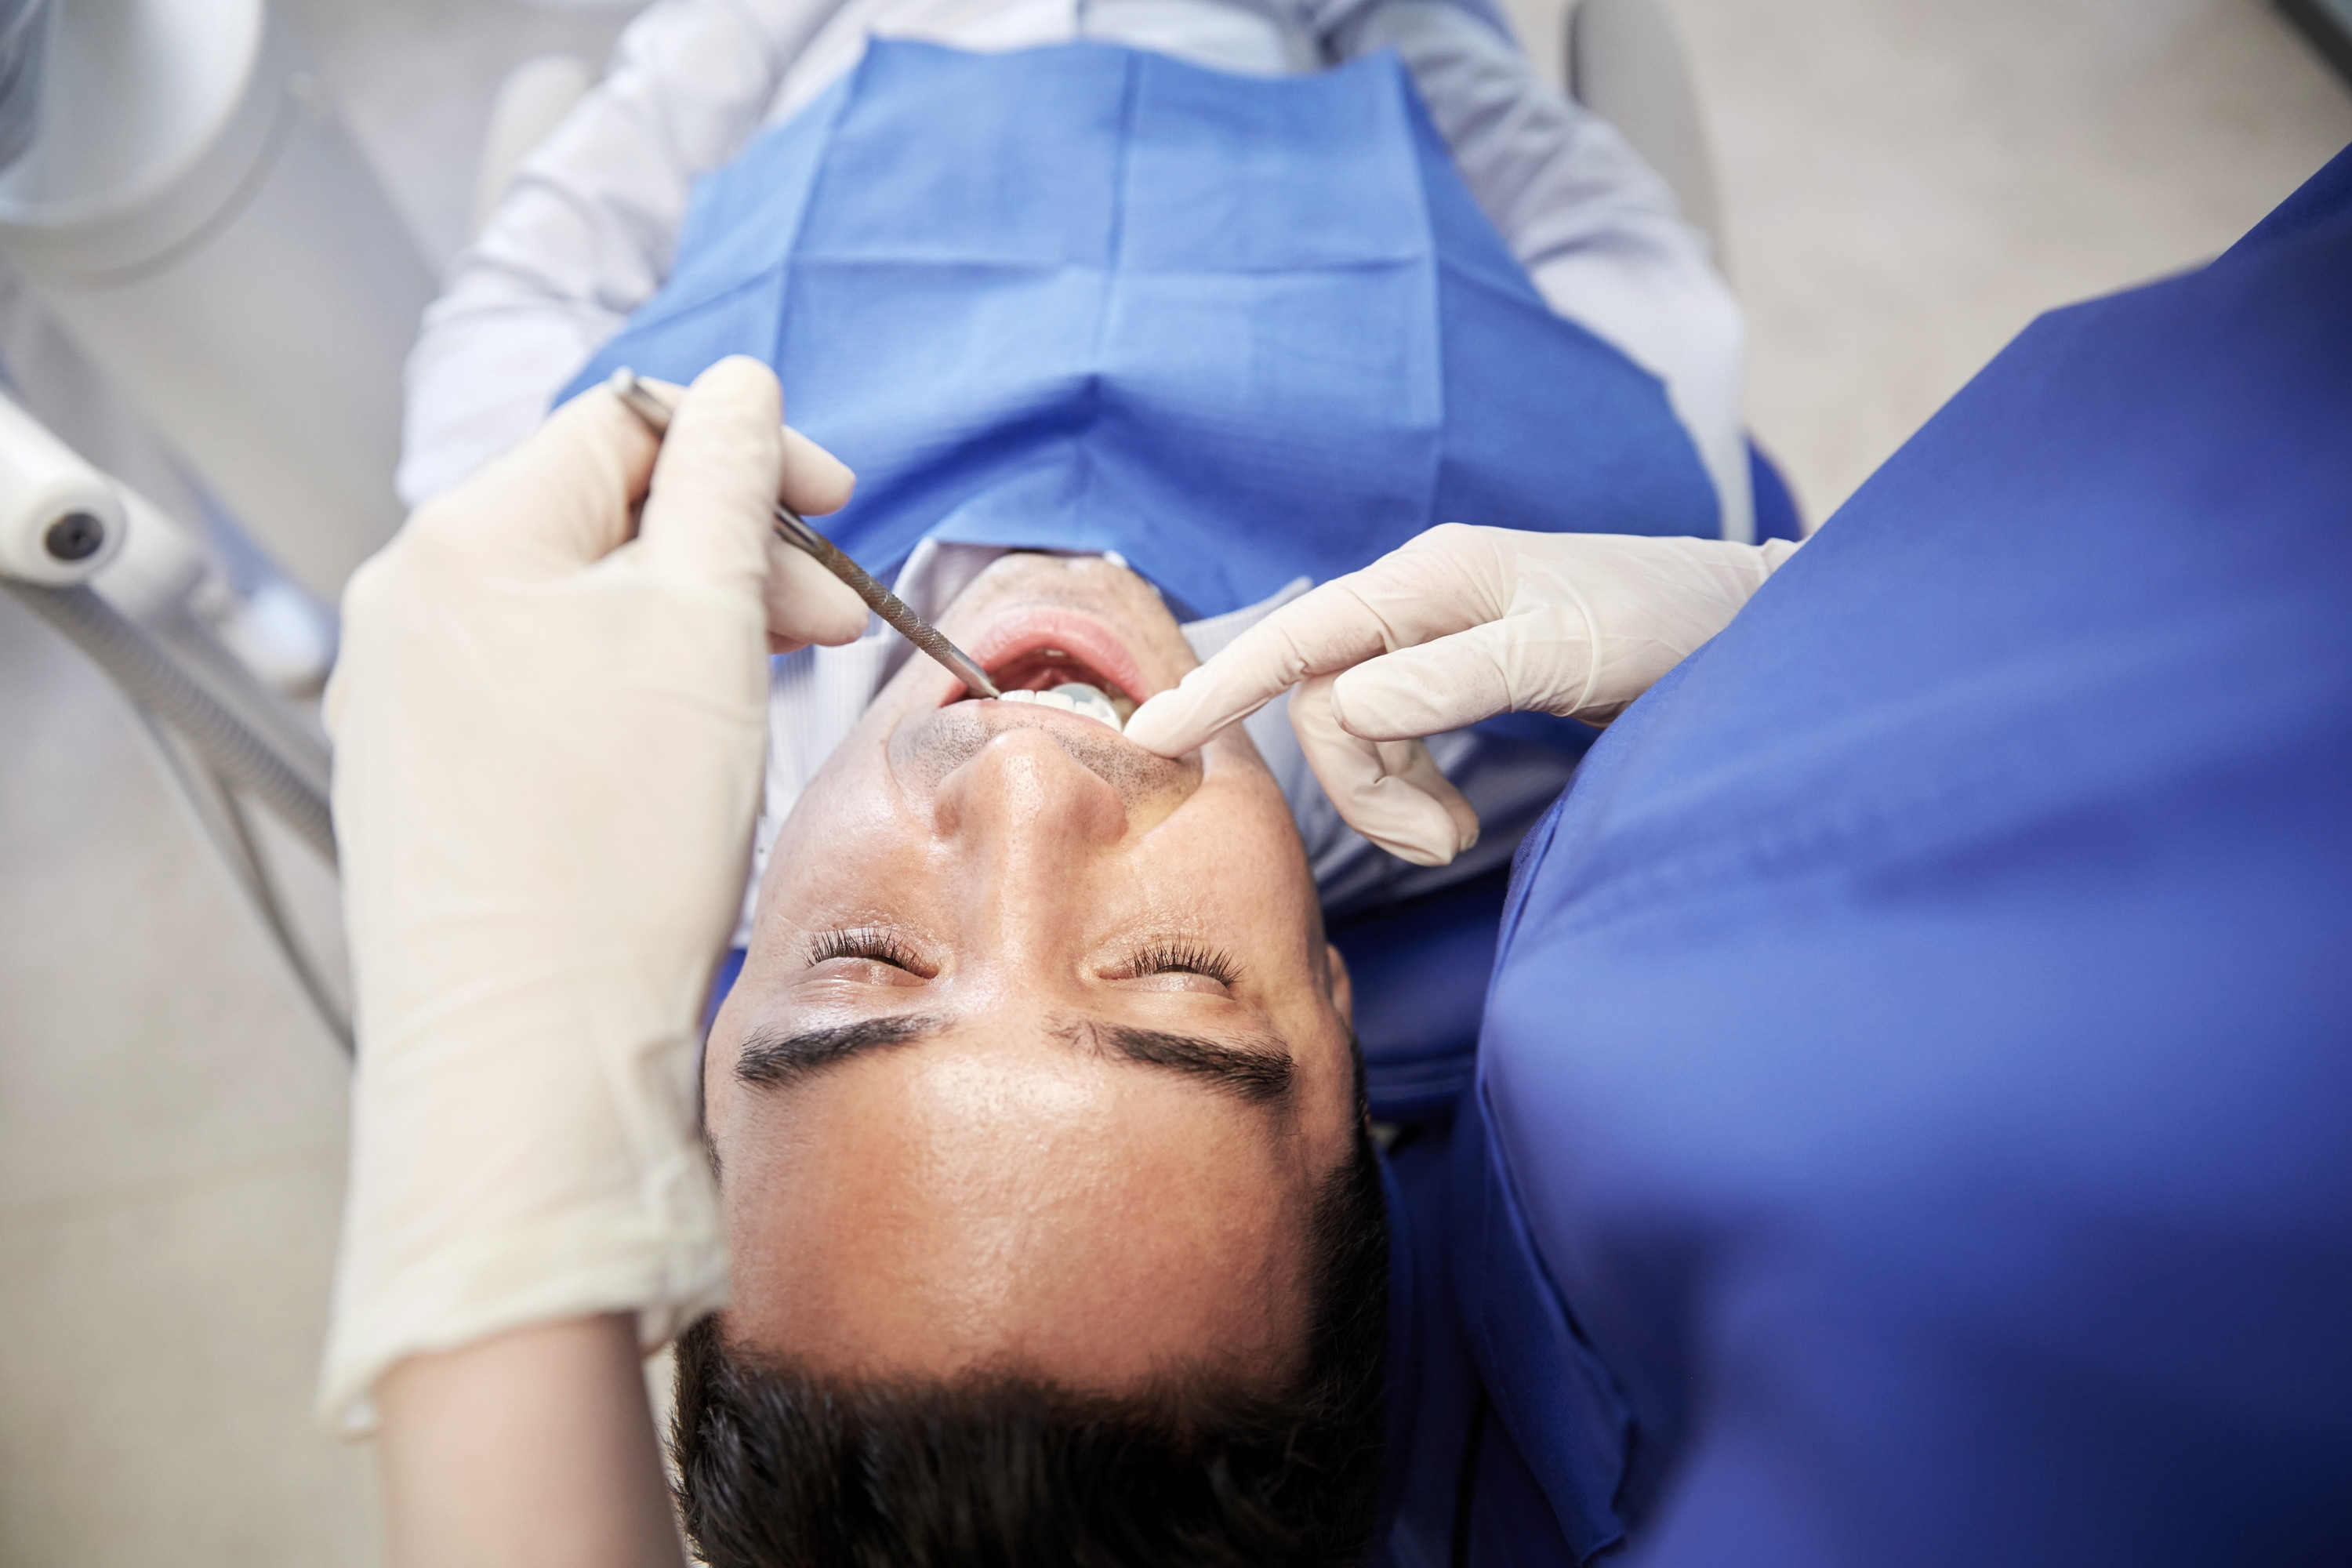 why you should ensure your dentist performs oral cancer screenings